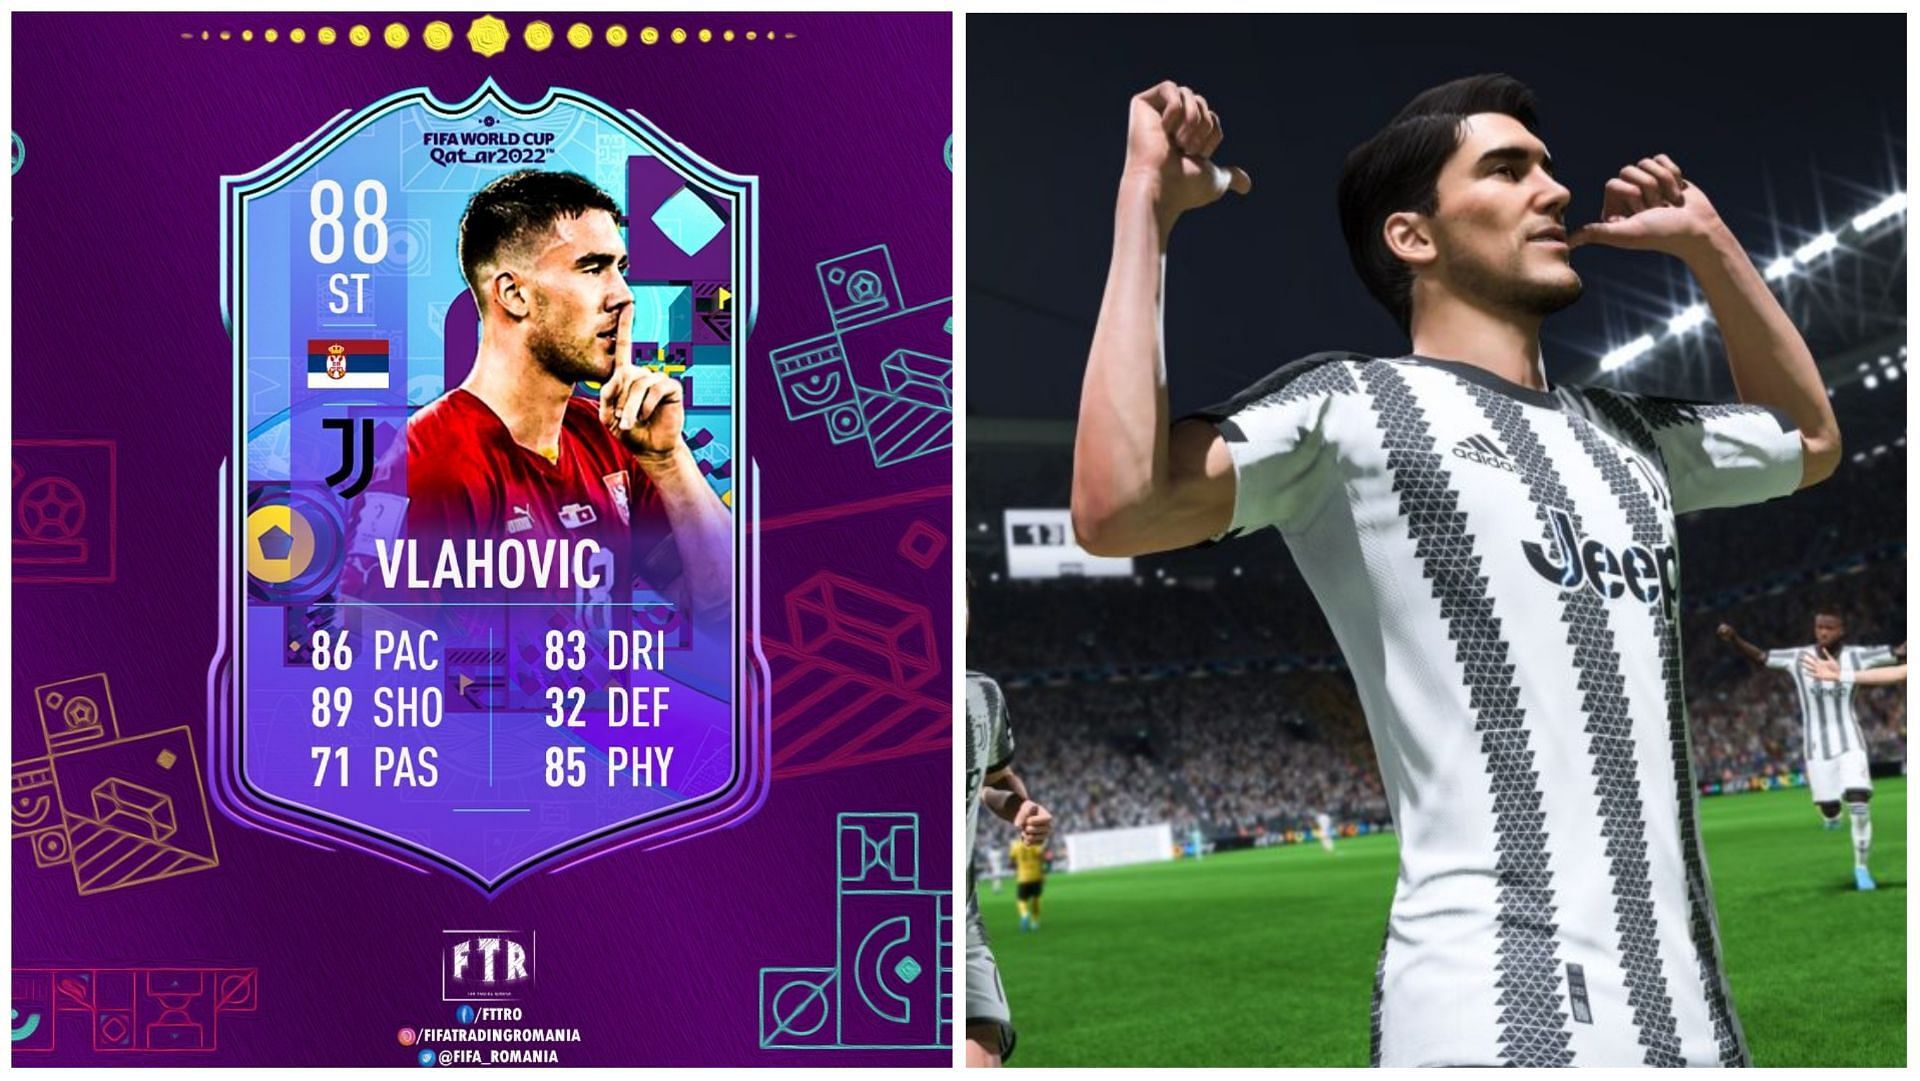 Dusan Vlahovic is rumored to receive an SBC in FIFA 23 (Images via Twitter/FIFATradingRomania and EA Sports)